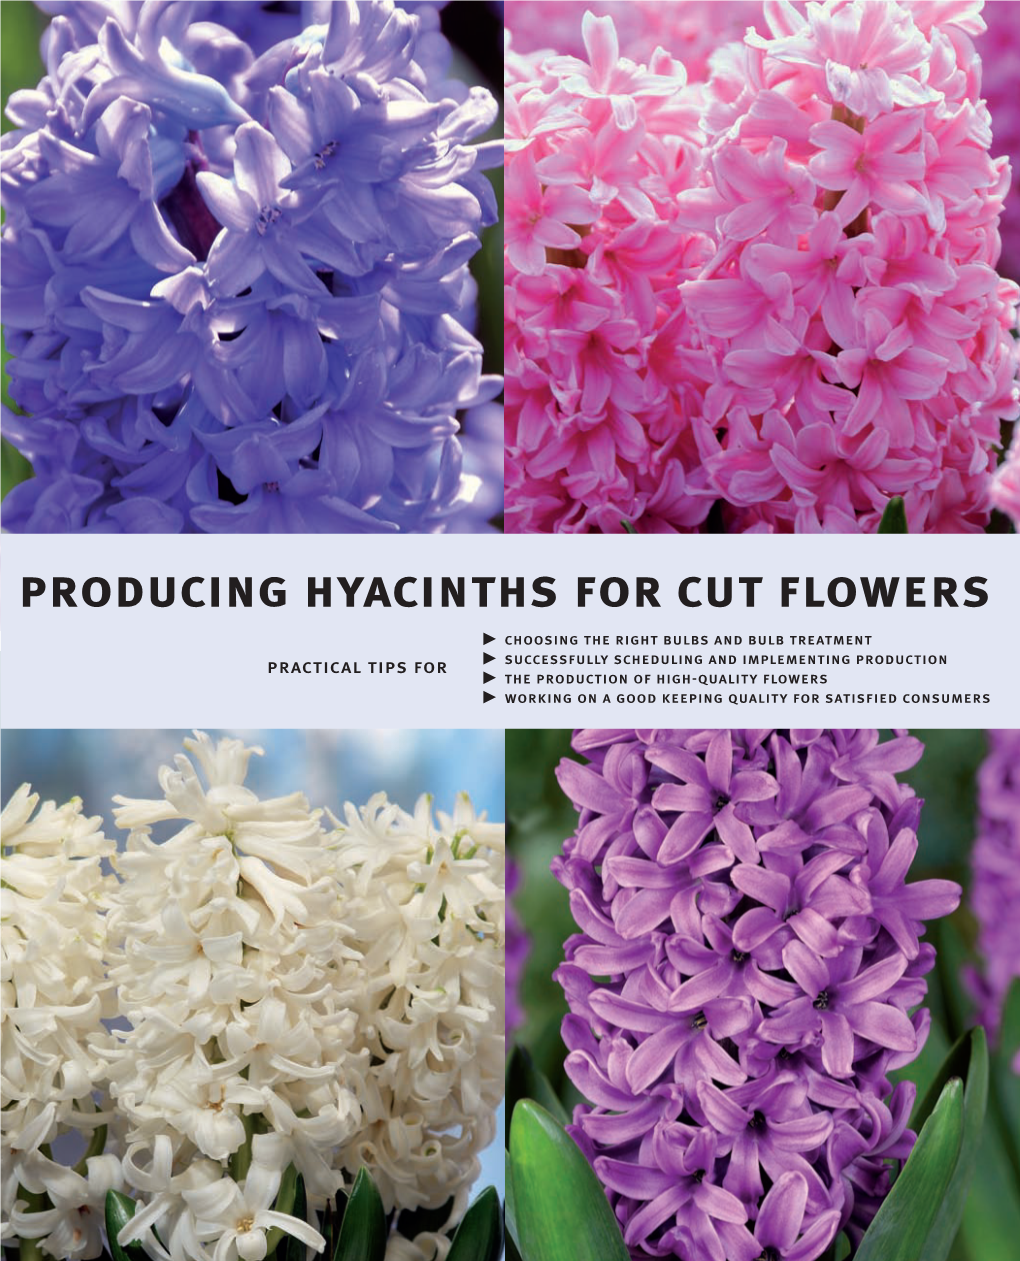 Producing Hyacinths for Cut Flowers Cold Period to Achieve Good Uniform Flowering with Stems and the Flower Often Sits Too Far Down Among the Leaves